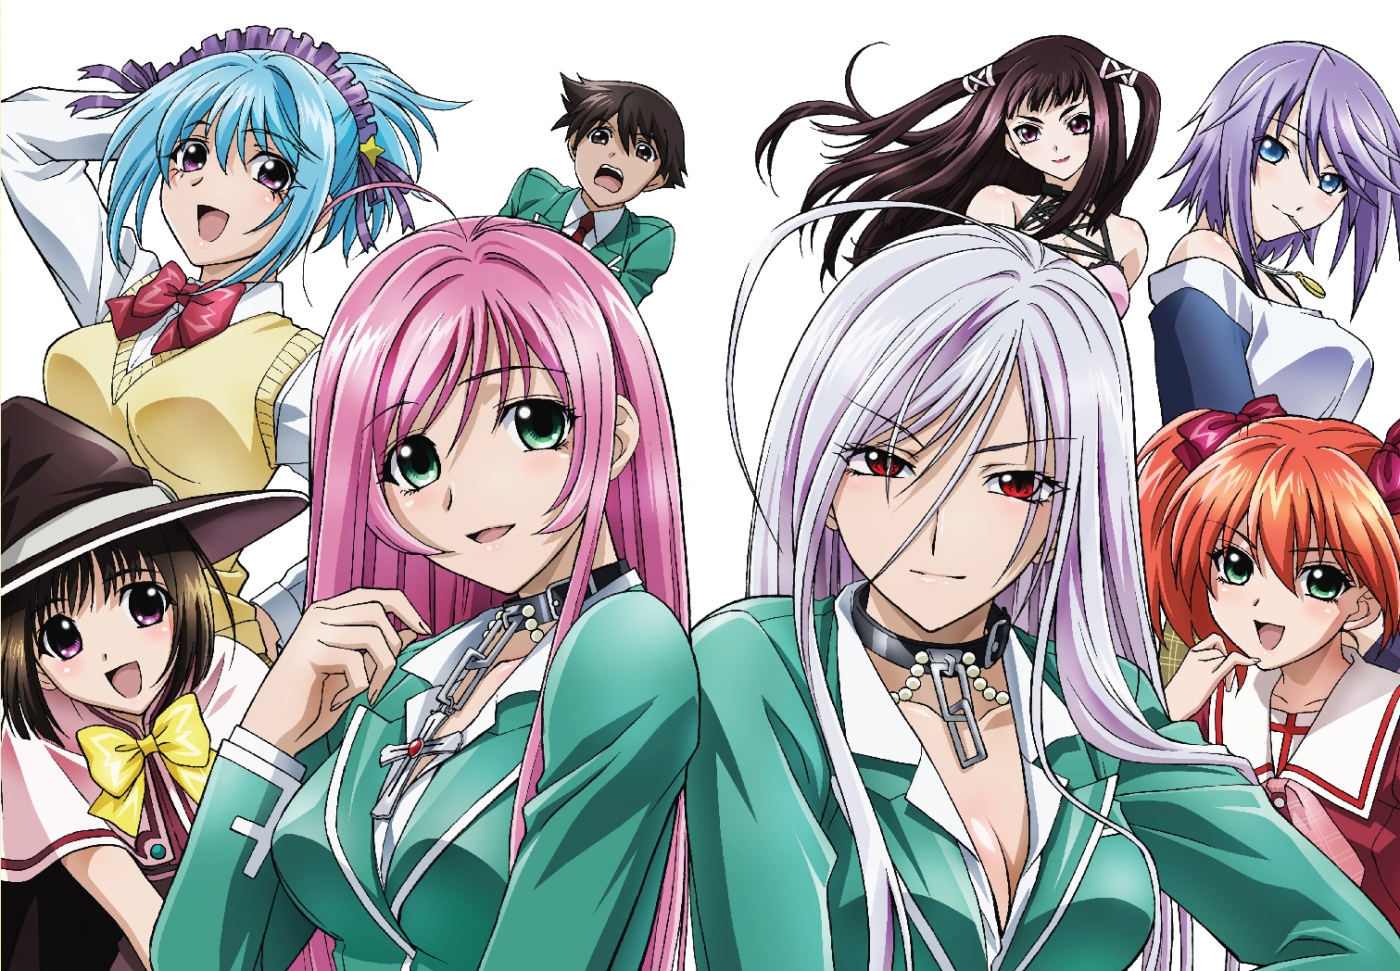 chad oberacker recommends anime like rosario vampire pic